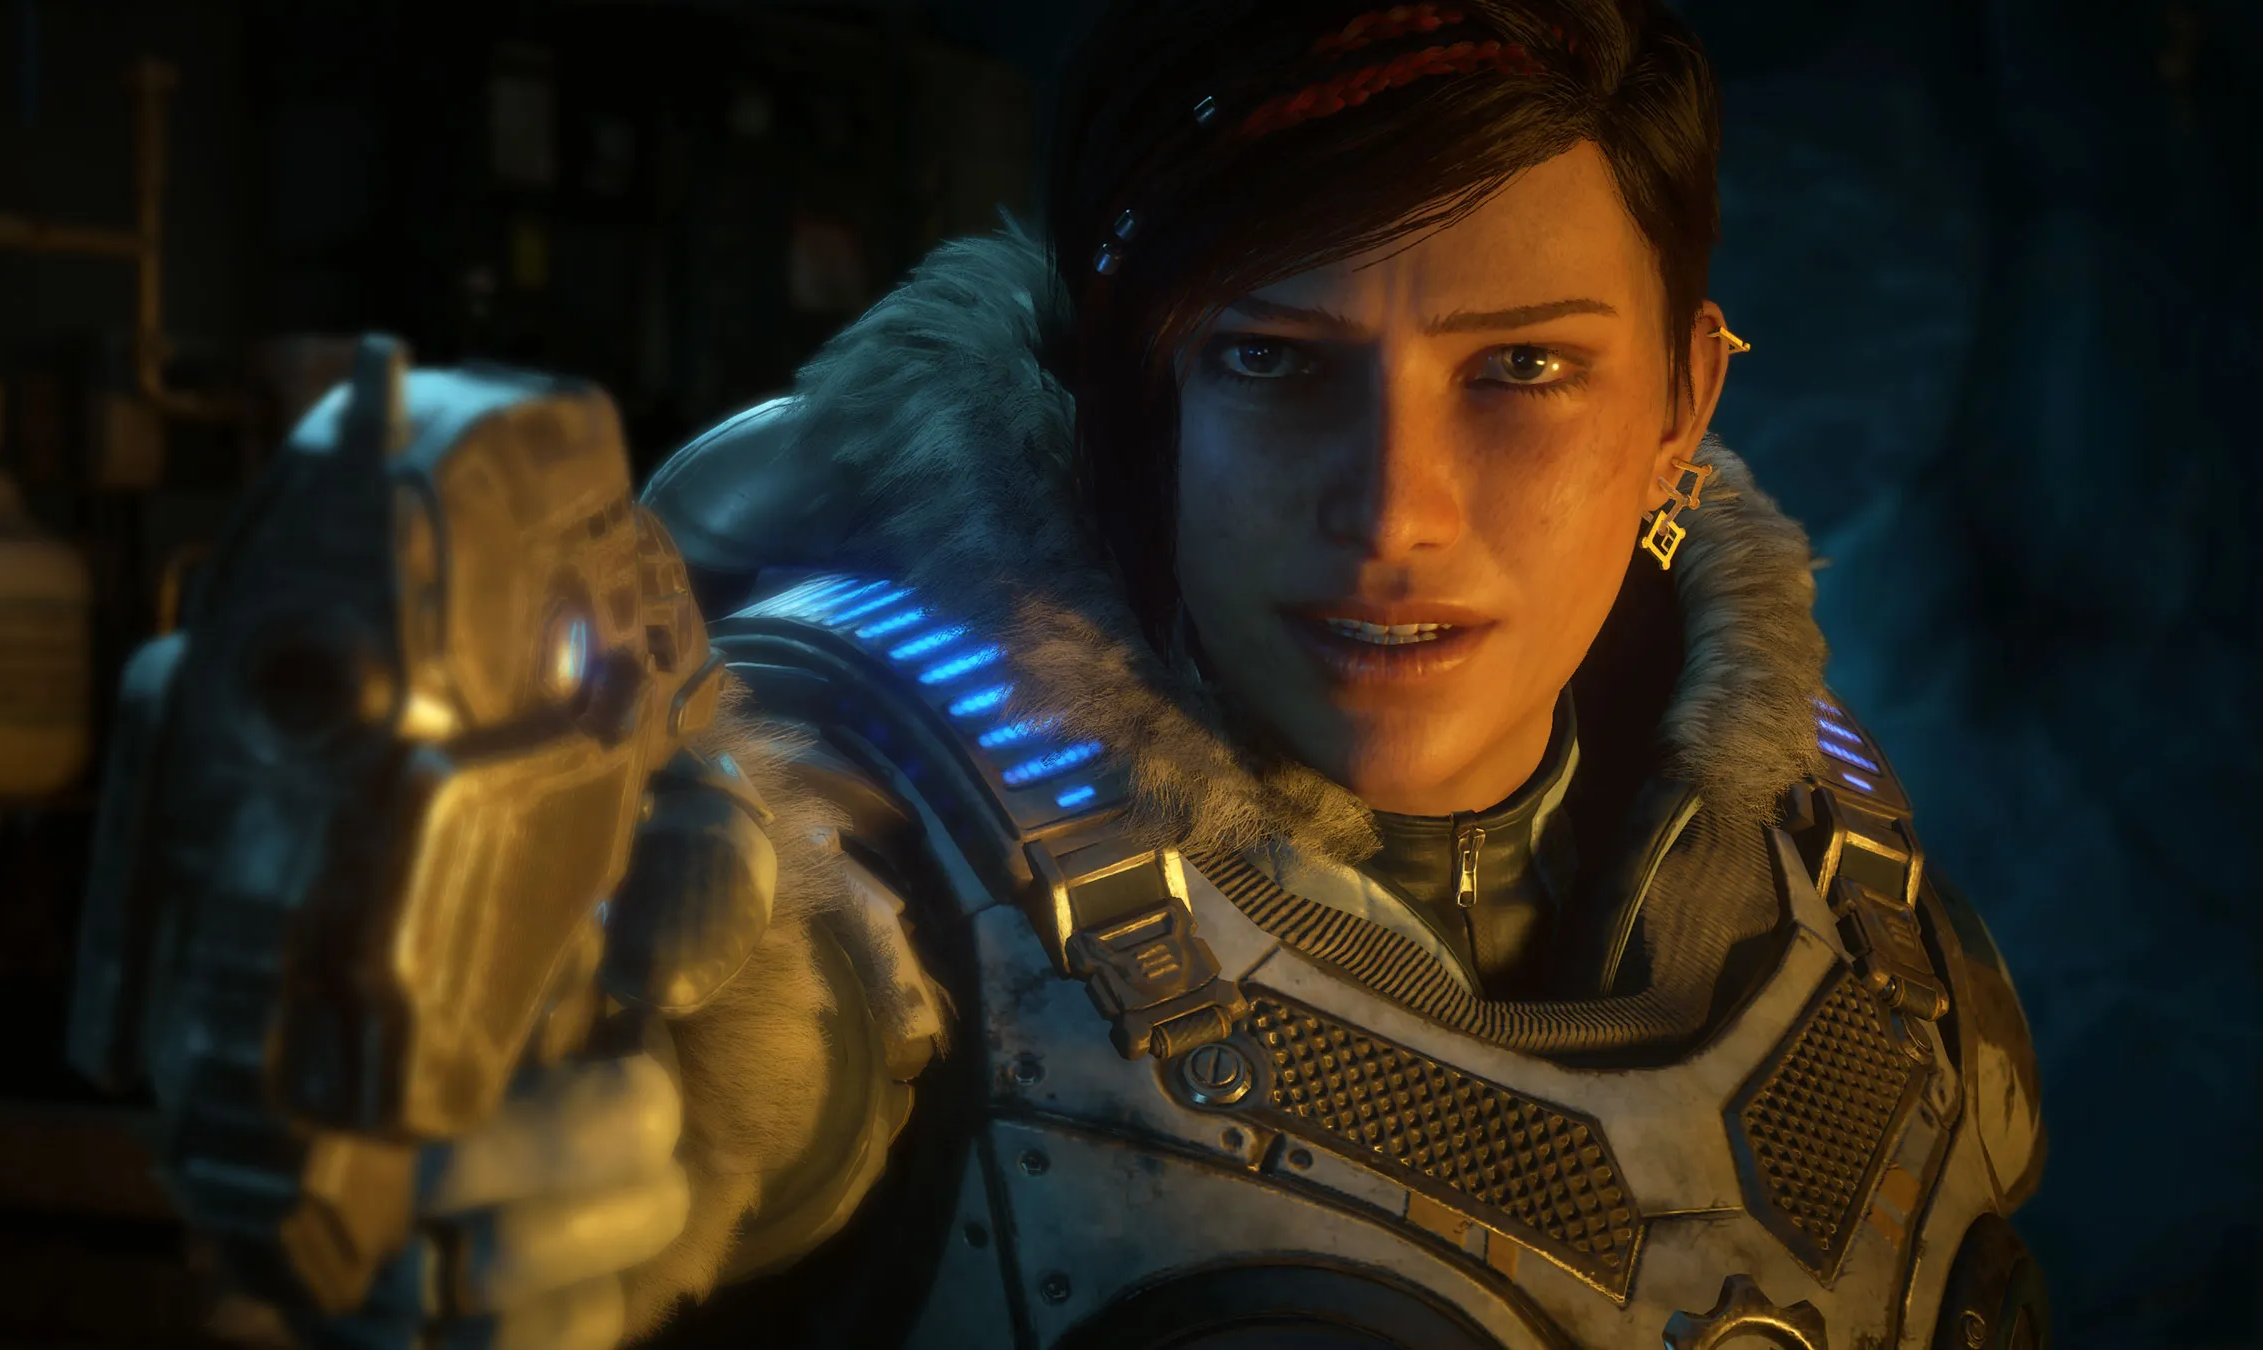 Female Representation in Videogames Isn't Getting Any Better